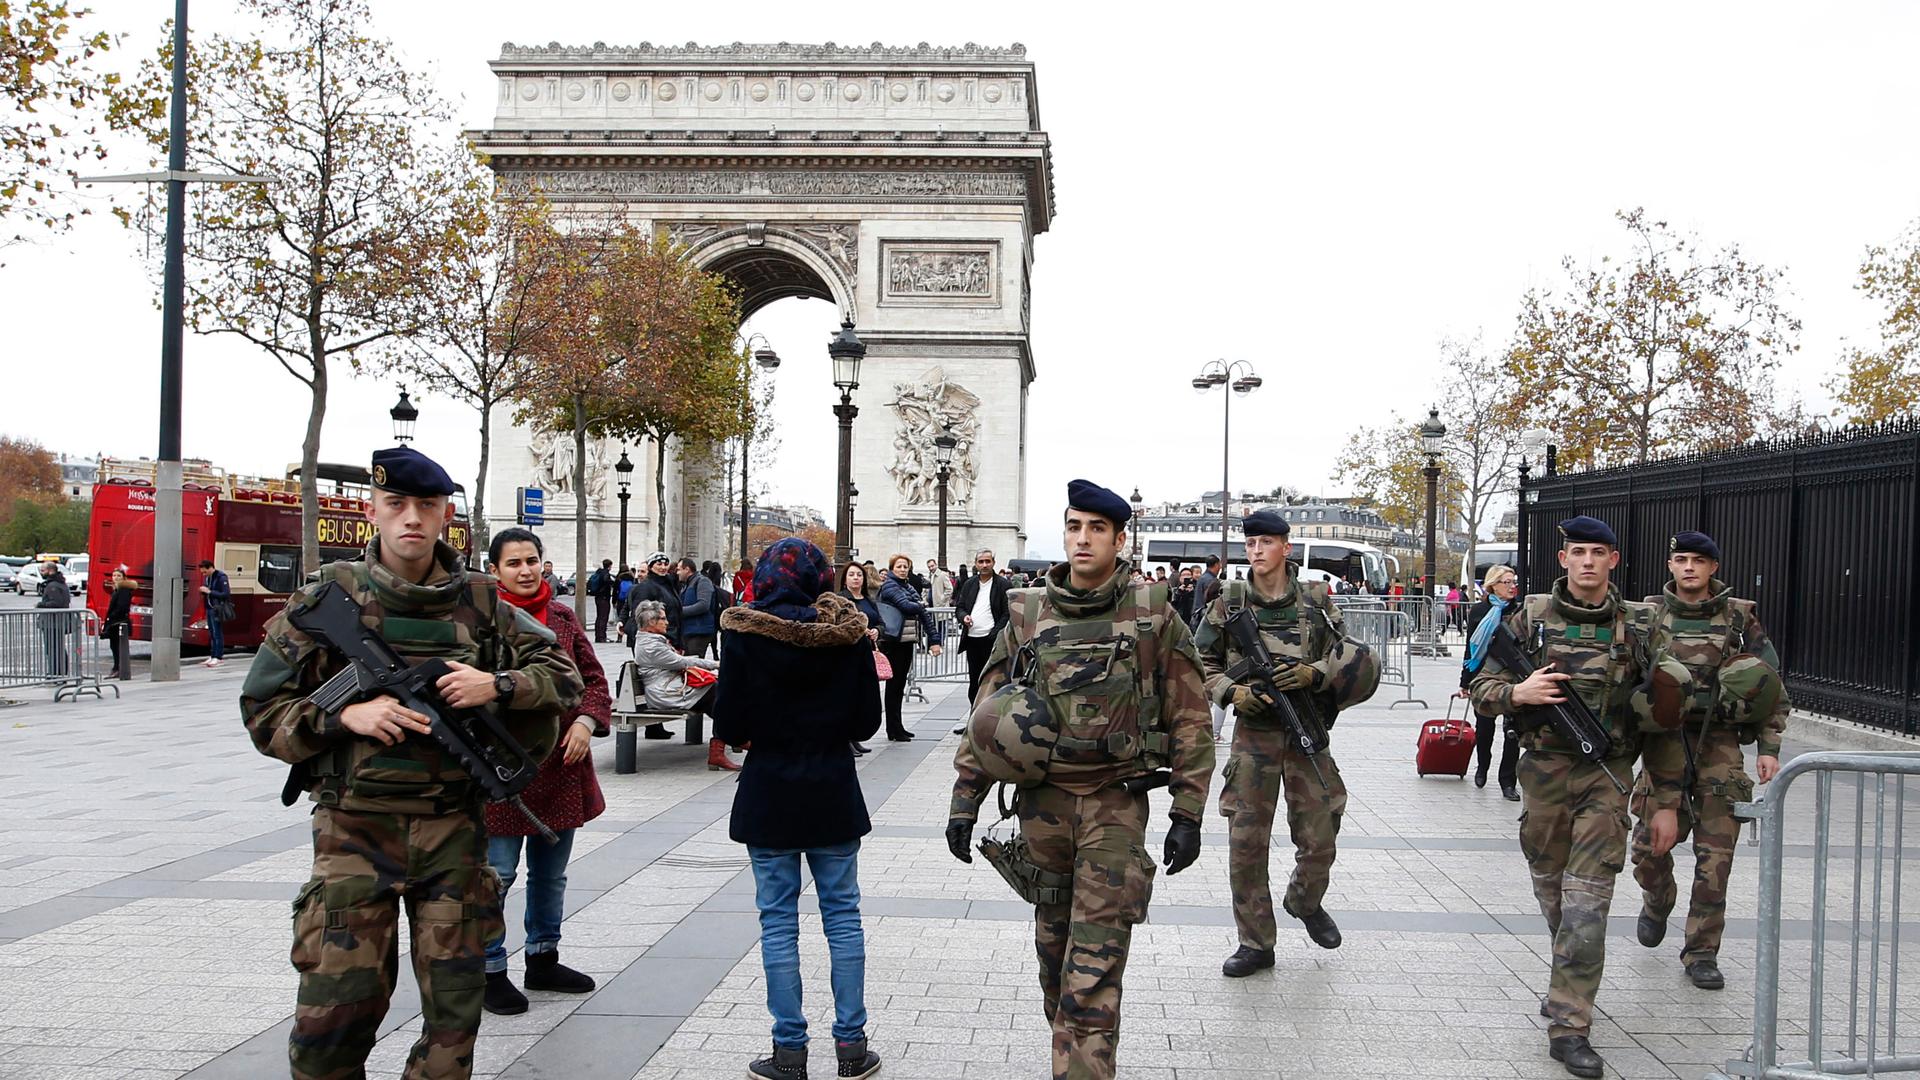 Soldiers patrol in front of the Arc de Triomphe on the Champs Elysees in Paris, France, November 16, 2015, as security increases after last Friday's series of deadly attacks in the French capital. 